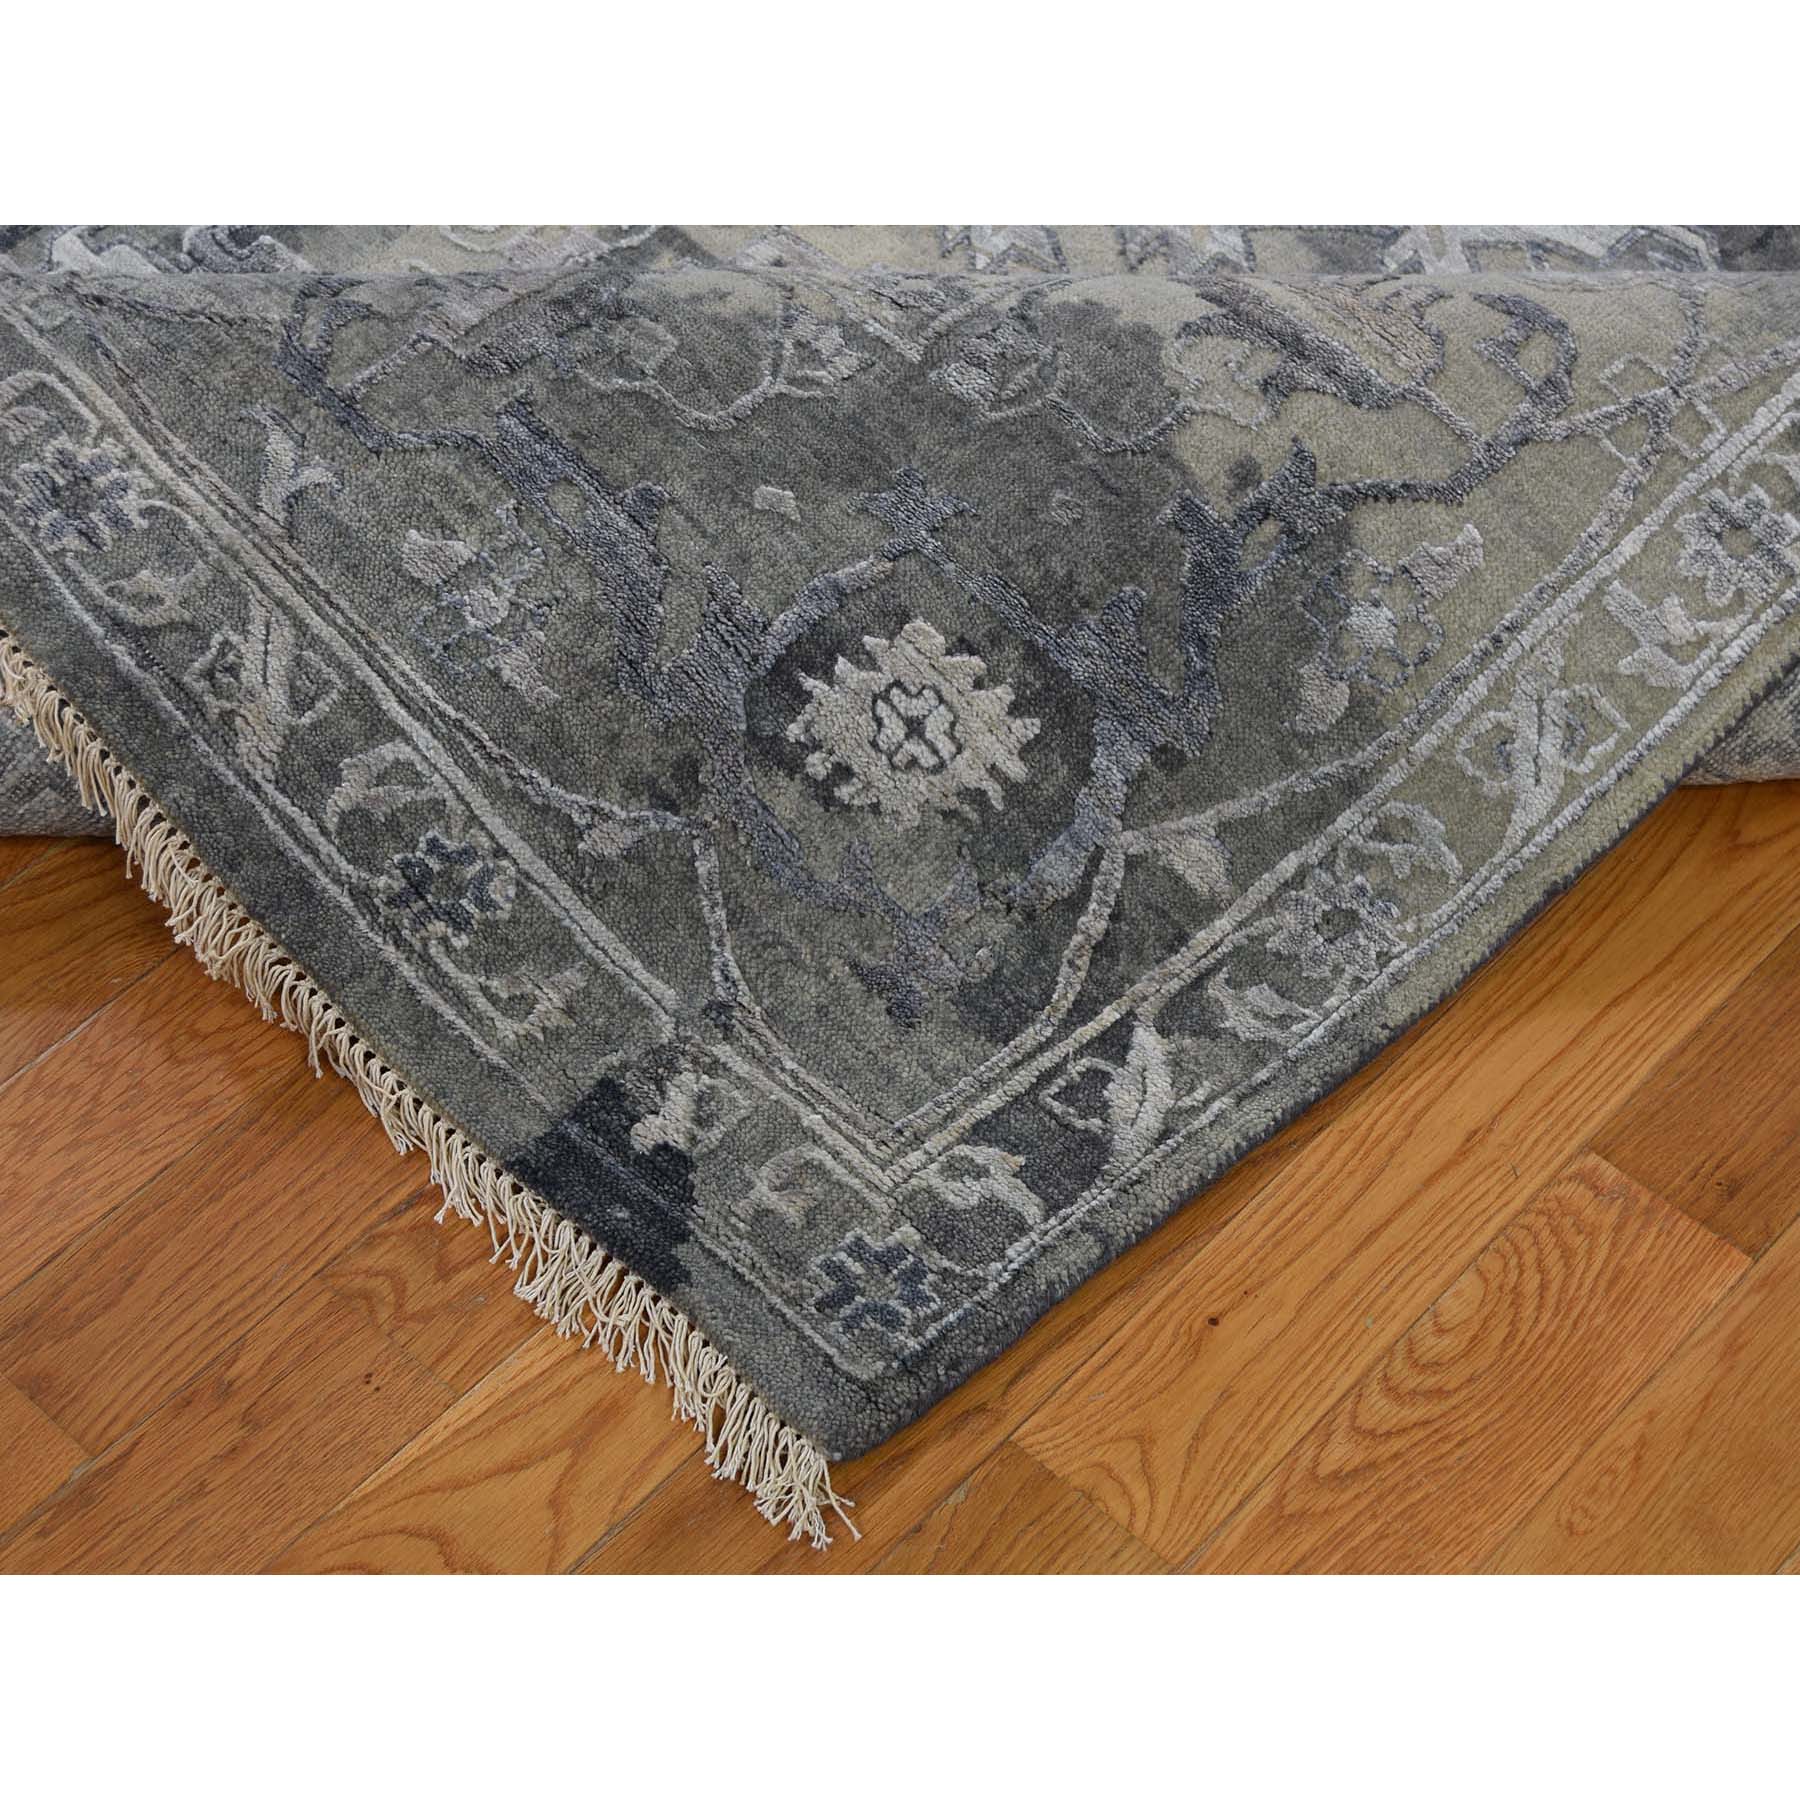 Handmade Transitional Rectangle Rug > Design# SH43398 > Size: 9'-0" x 12'-0" [ONLINE ONLY]